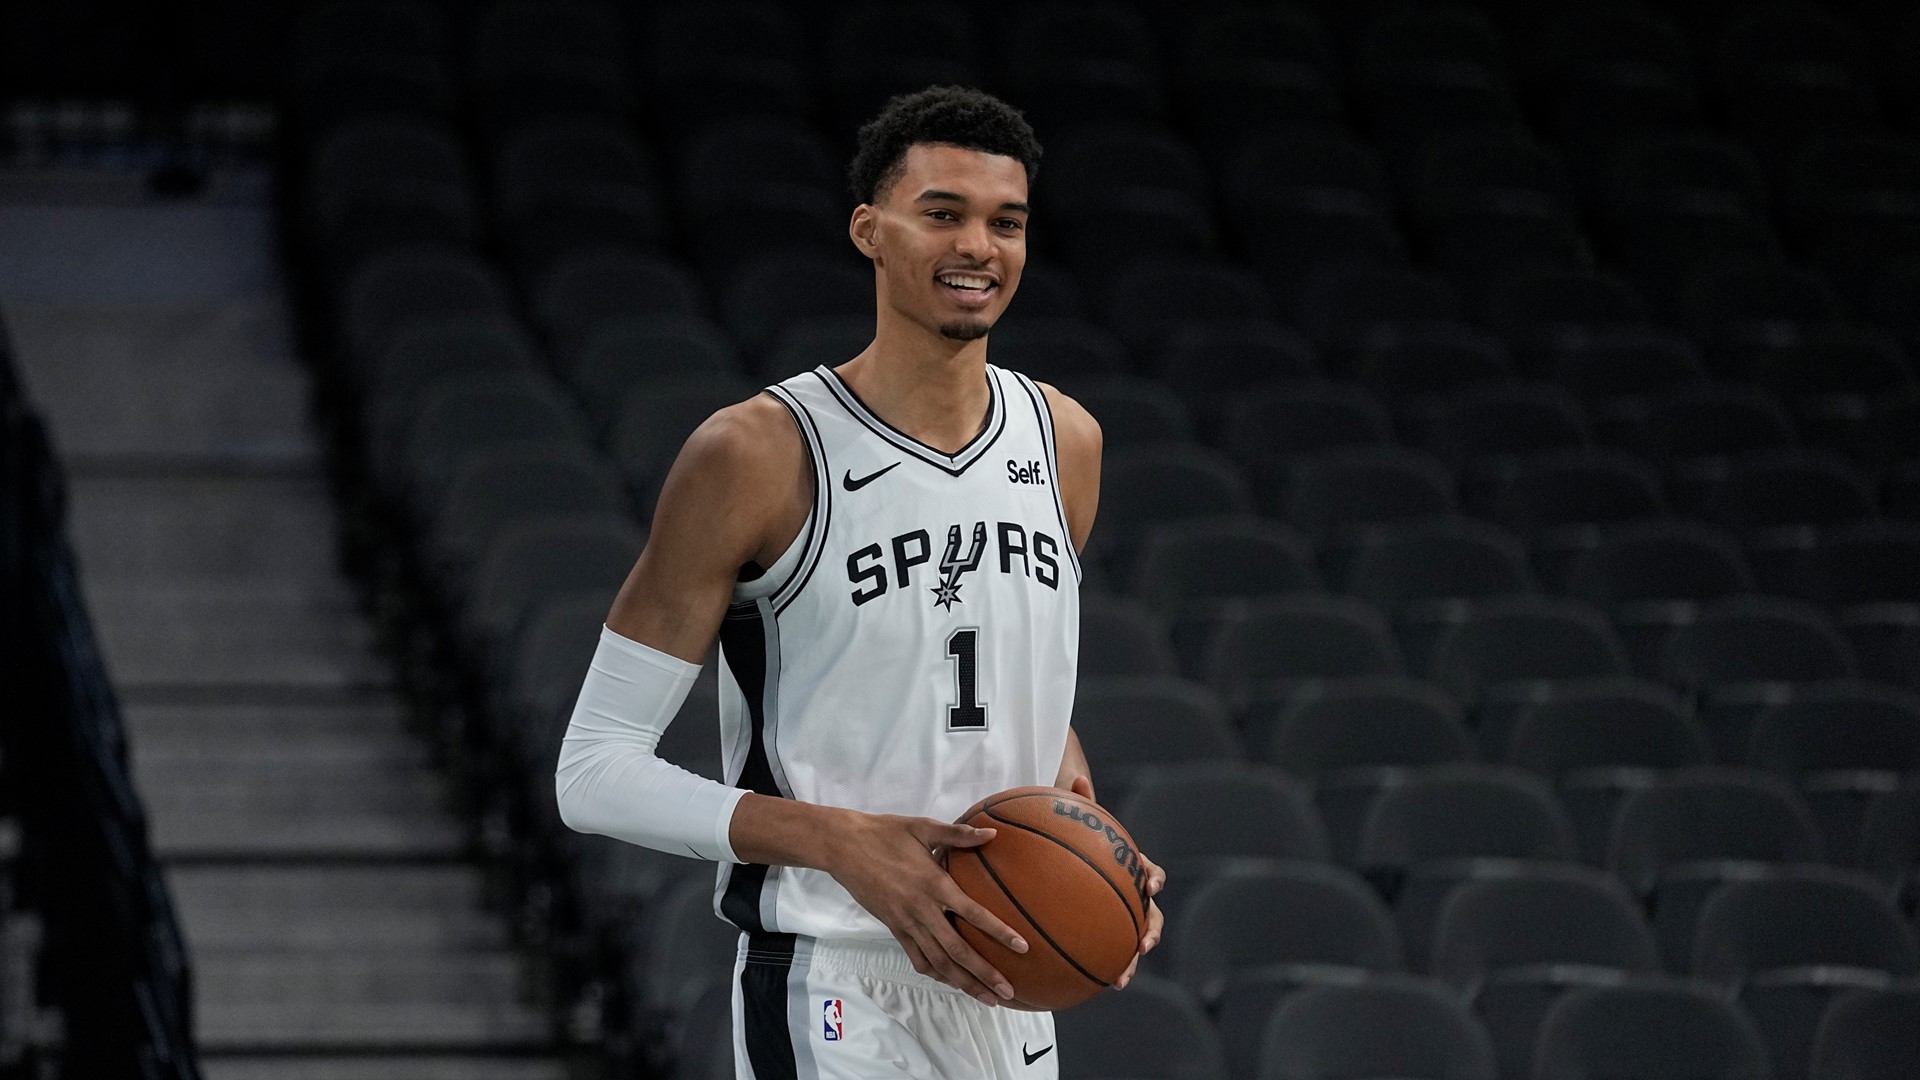 Just off the Las Vegas Strip on Friday night, the most anticipated NBA prospect in 20 years will play his first game for San Antonio in front of a sellout crowd.